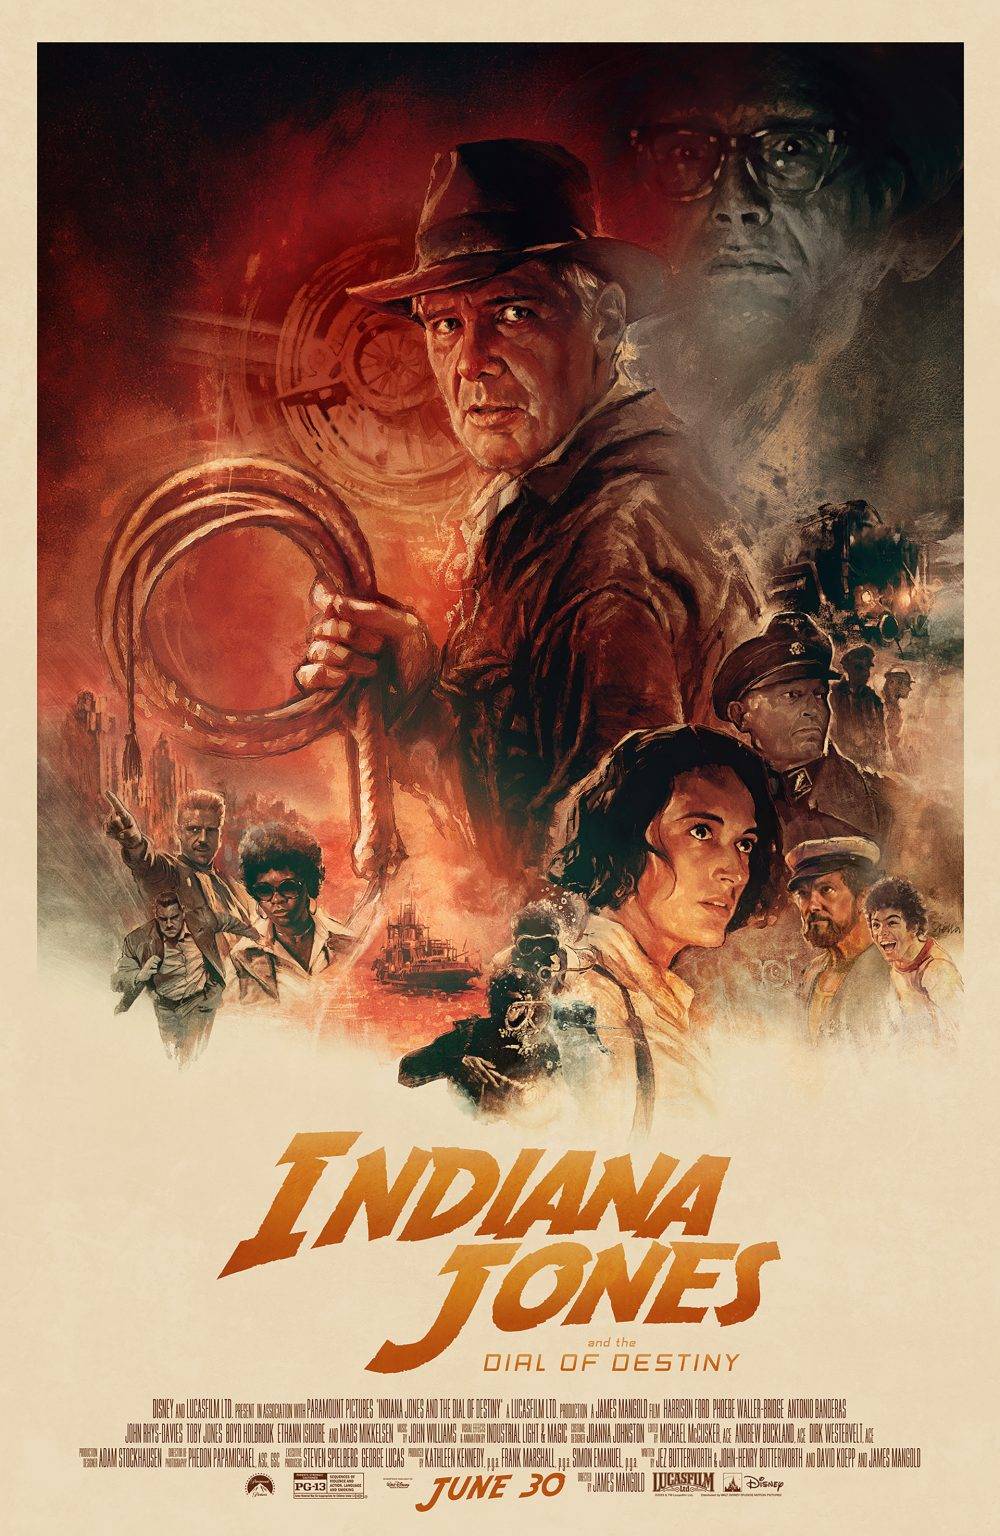 Indiana Jones and the Dial of Destiny logo and poster